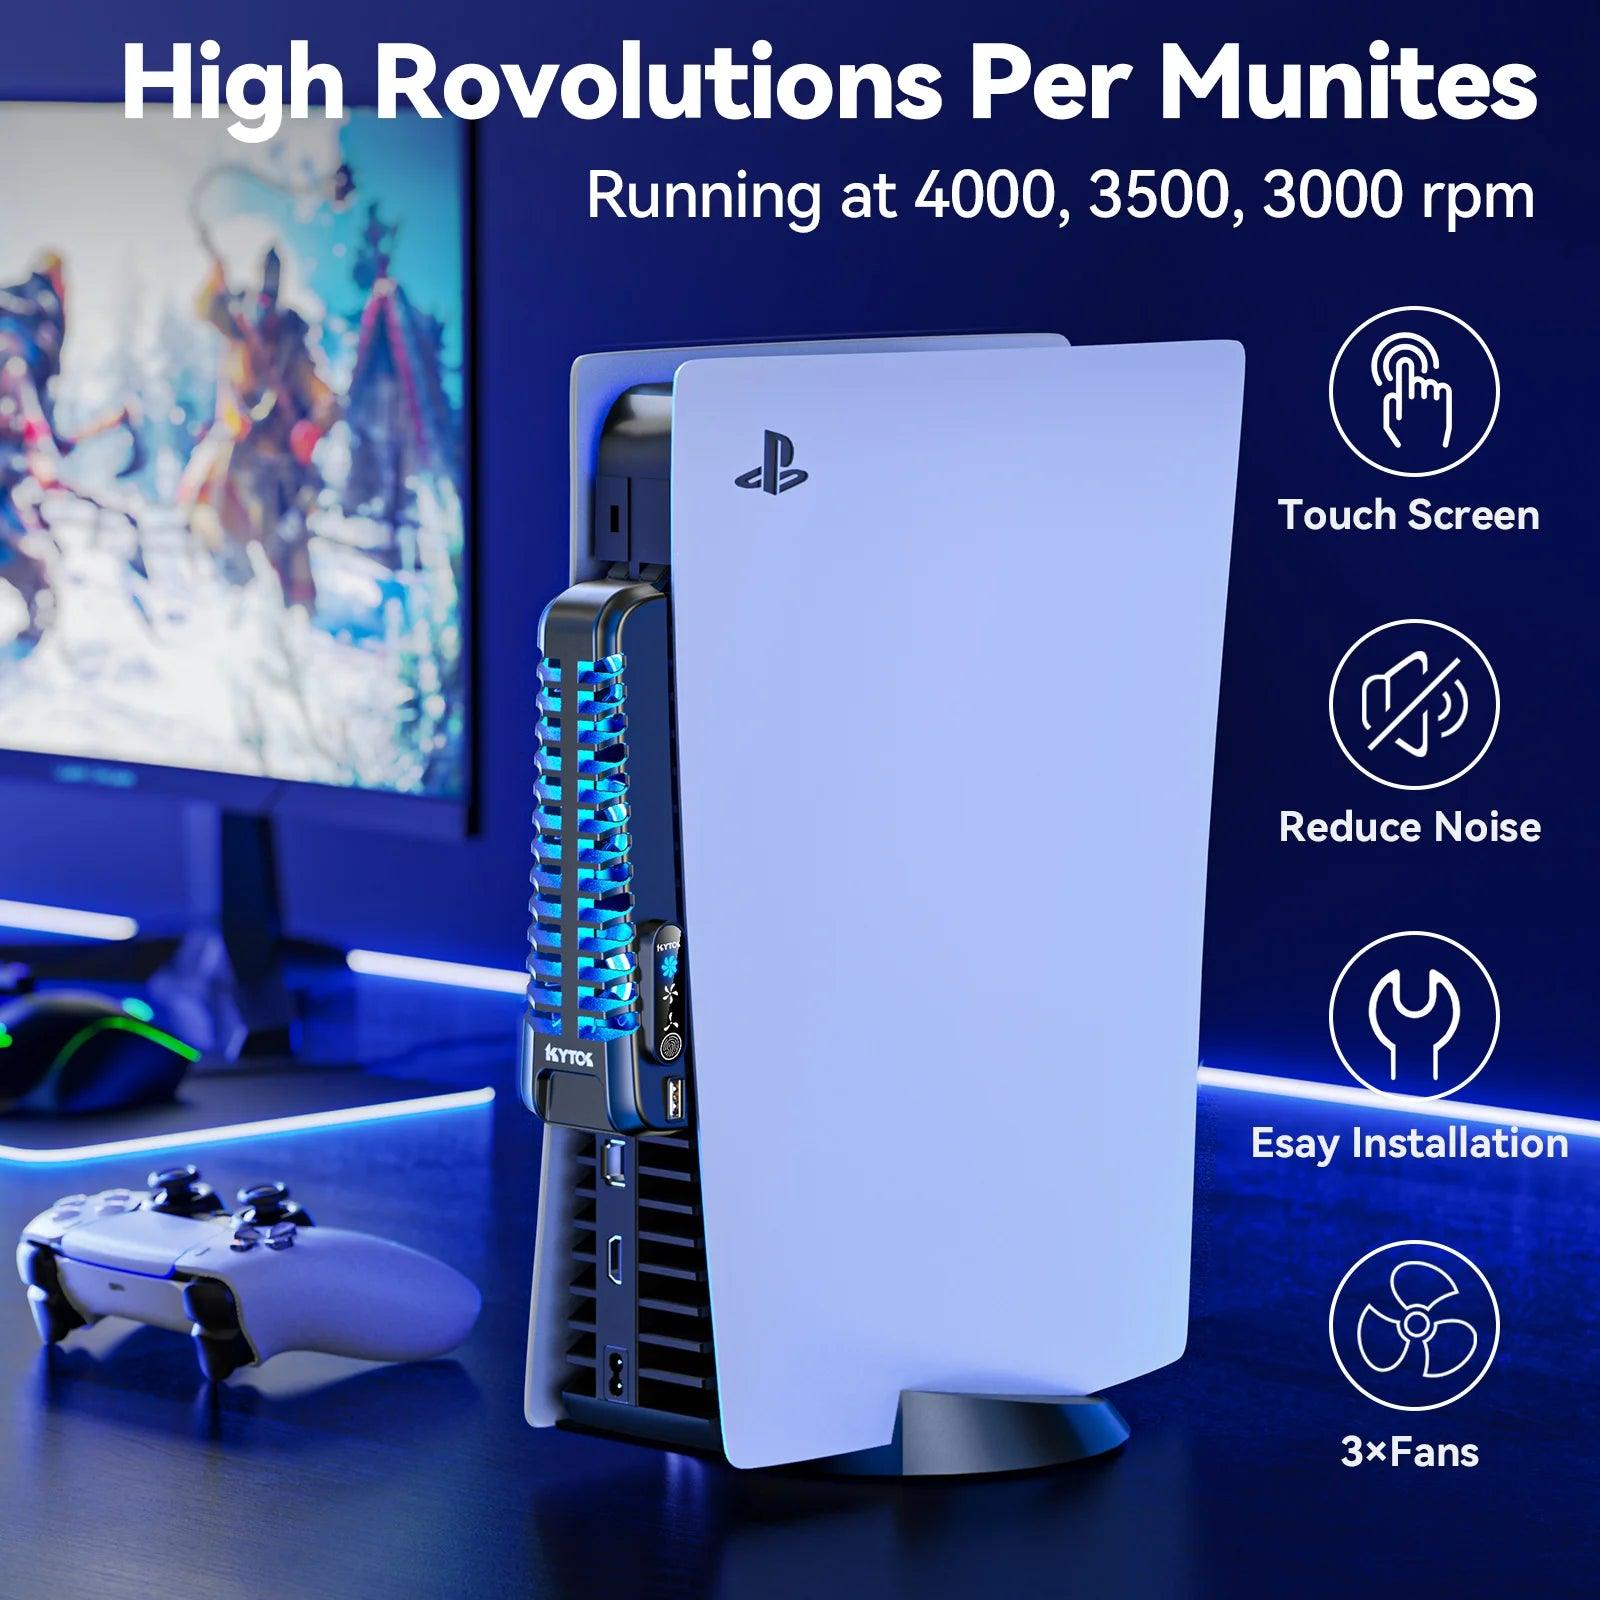 Enhance Your PS5 Gaming Setup with Upgraded Cooling Fan and USB Hub Combo  ourlum.com   